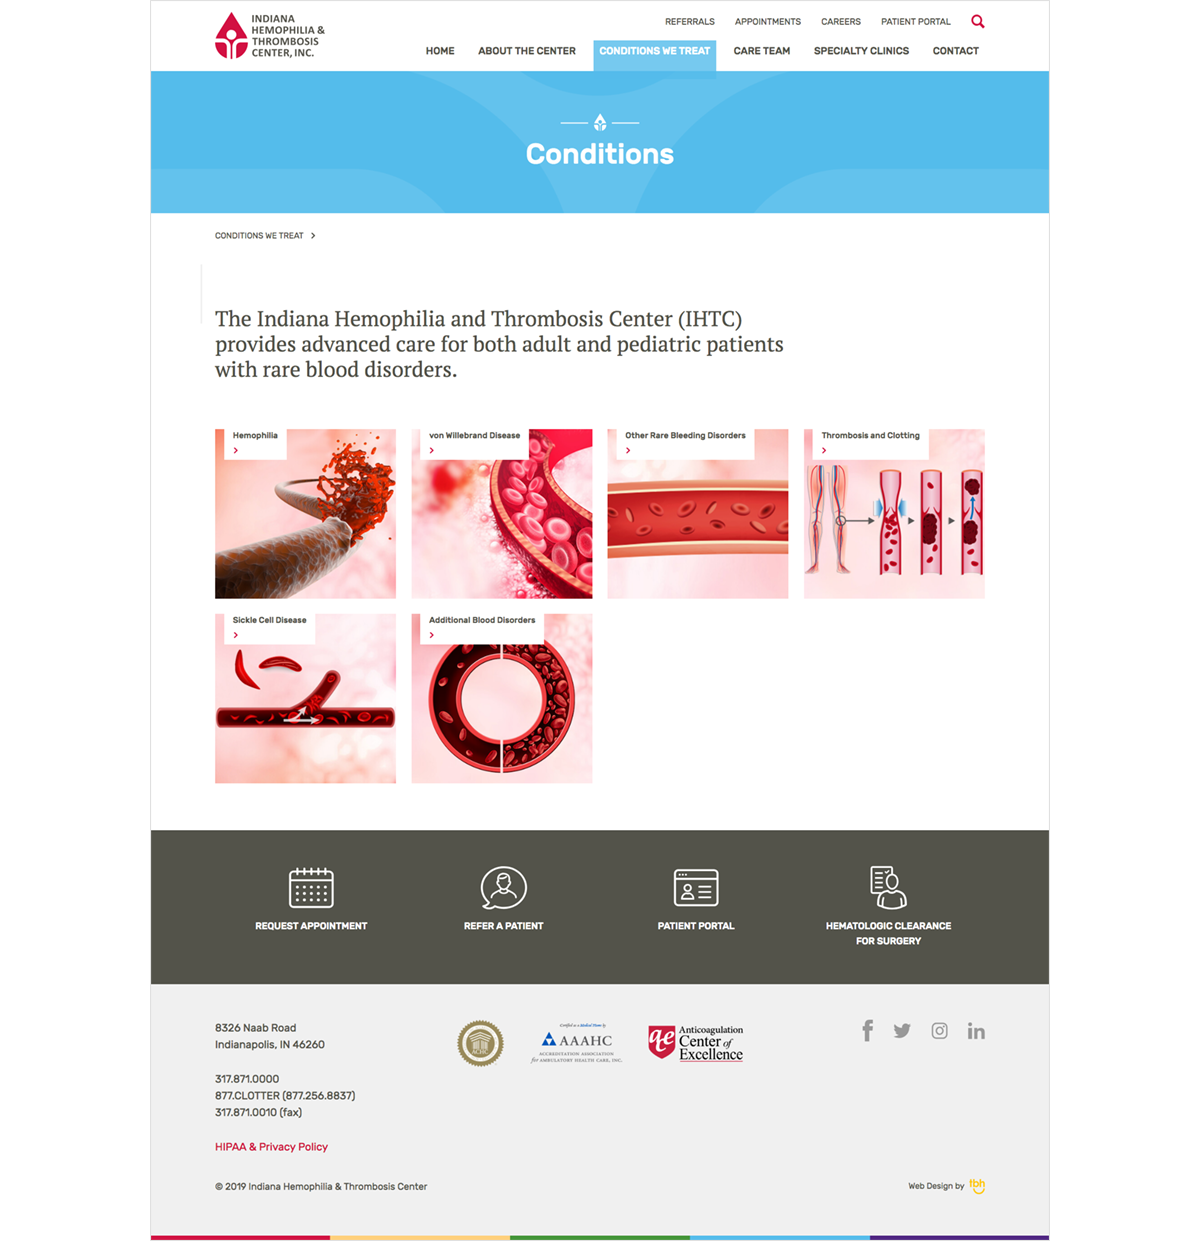 Indiana Hemophilia and Thrombosis Center's visual landing page makes it easy to navigate to additional information about their specialties.